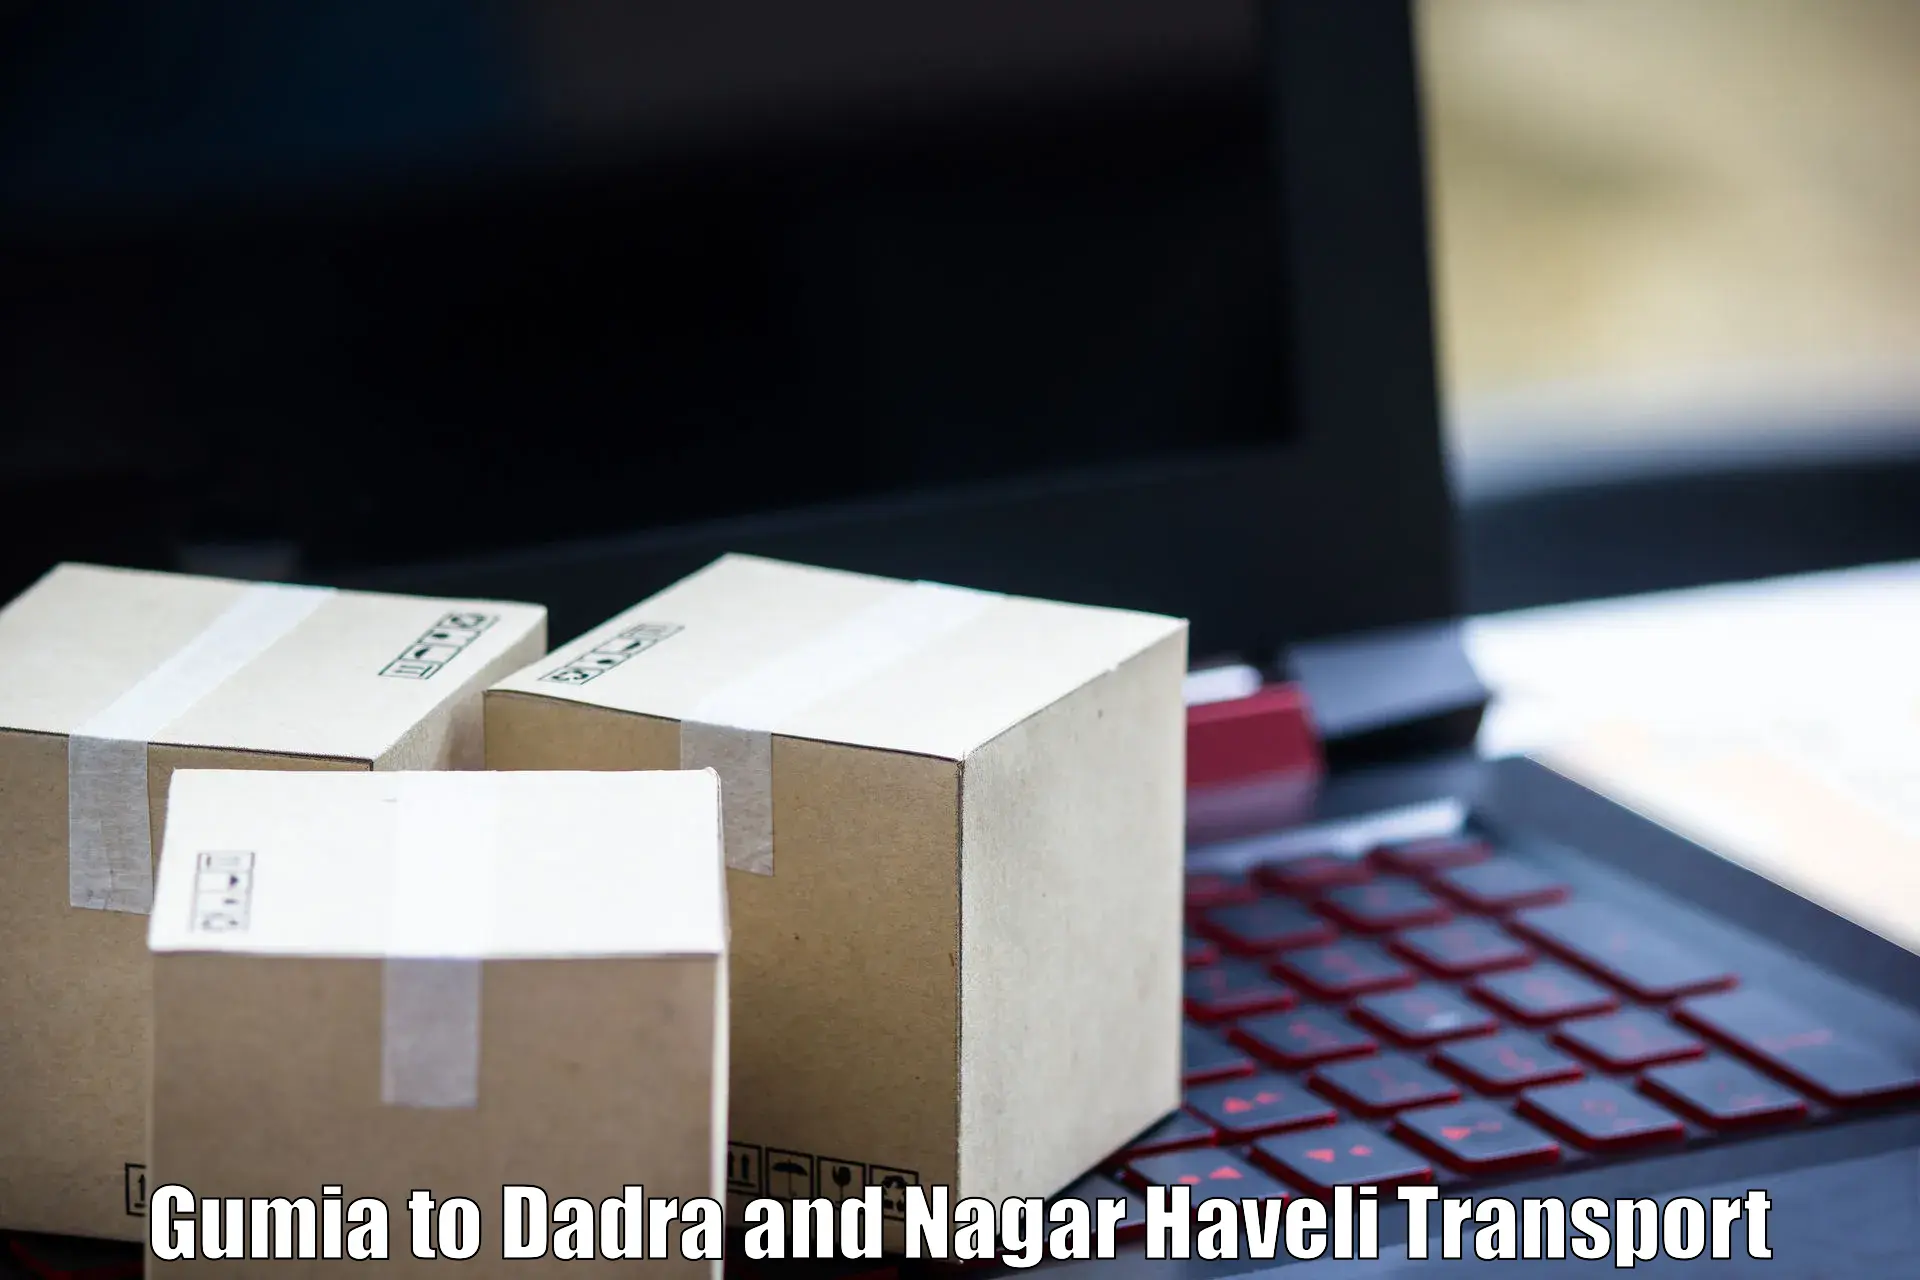 Online transport booking Gumia to Dadra and Nagar Haveli